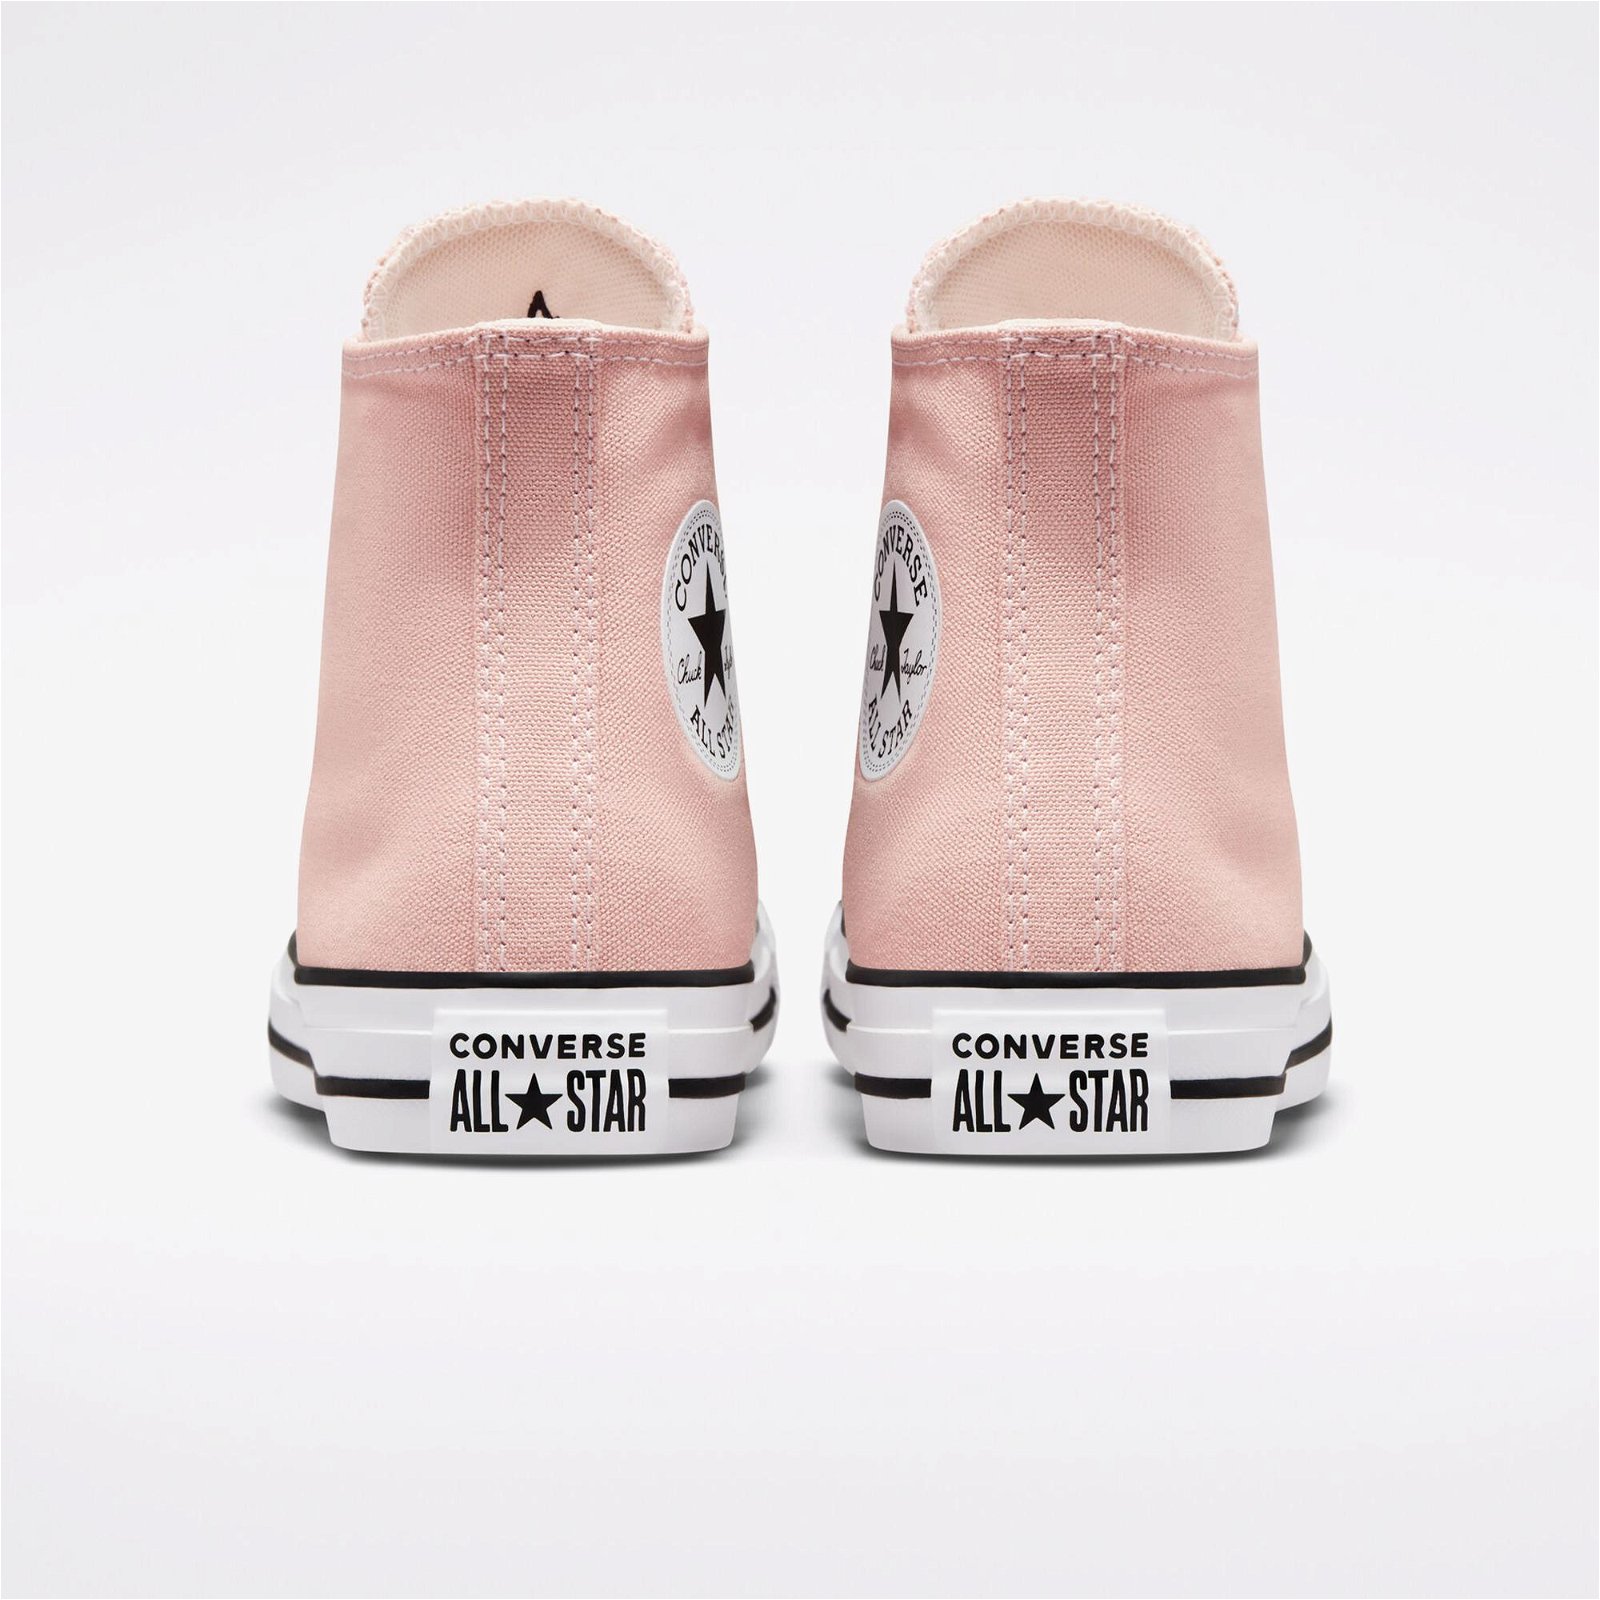 Converse Chuck Taylor All Star Partially Recycled Cotton High Unisex Pembe Sneaker